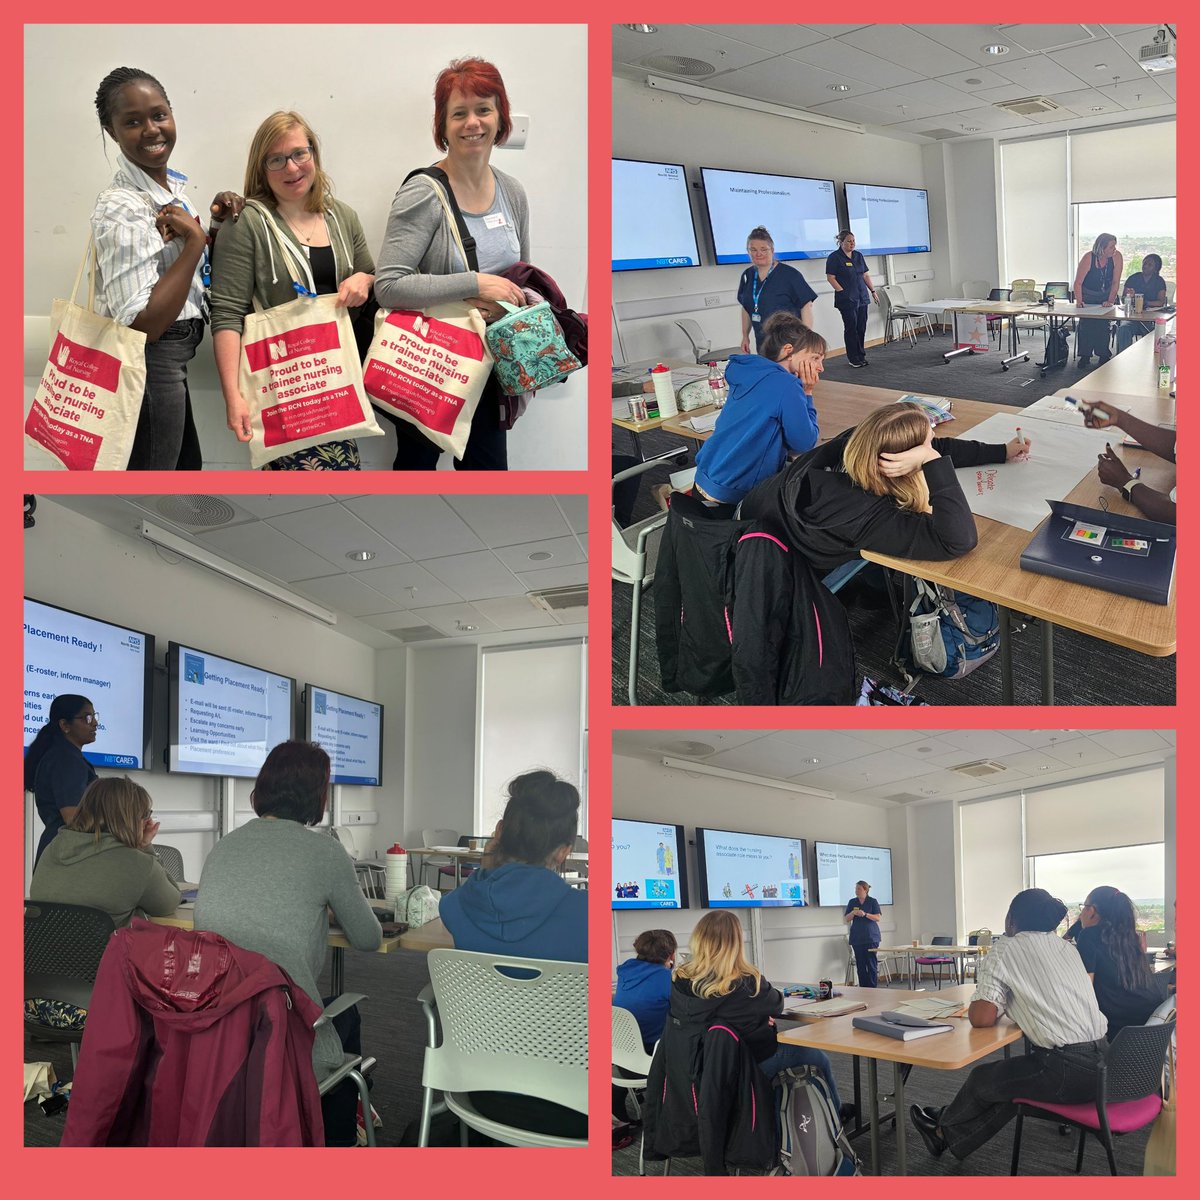 Today, we welcomed our enthusiastic May 24 cohort of #TraineeNursingAssociates at TNA induction @NorthBristolNHS Thanks @NBT_FTSU @NBTStaffExp @NBT_Library for your great sessions and #QNAAmbassadars for sharing your valuable TNA journey at NBT @manning_84 @NBTApprentices1